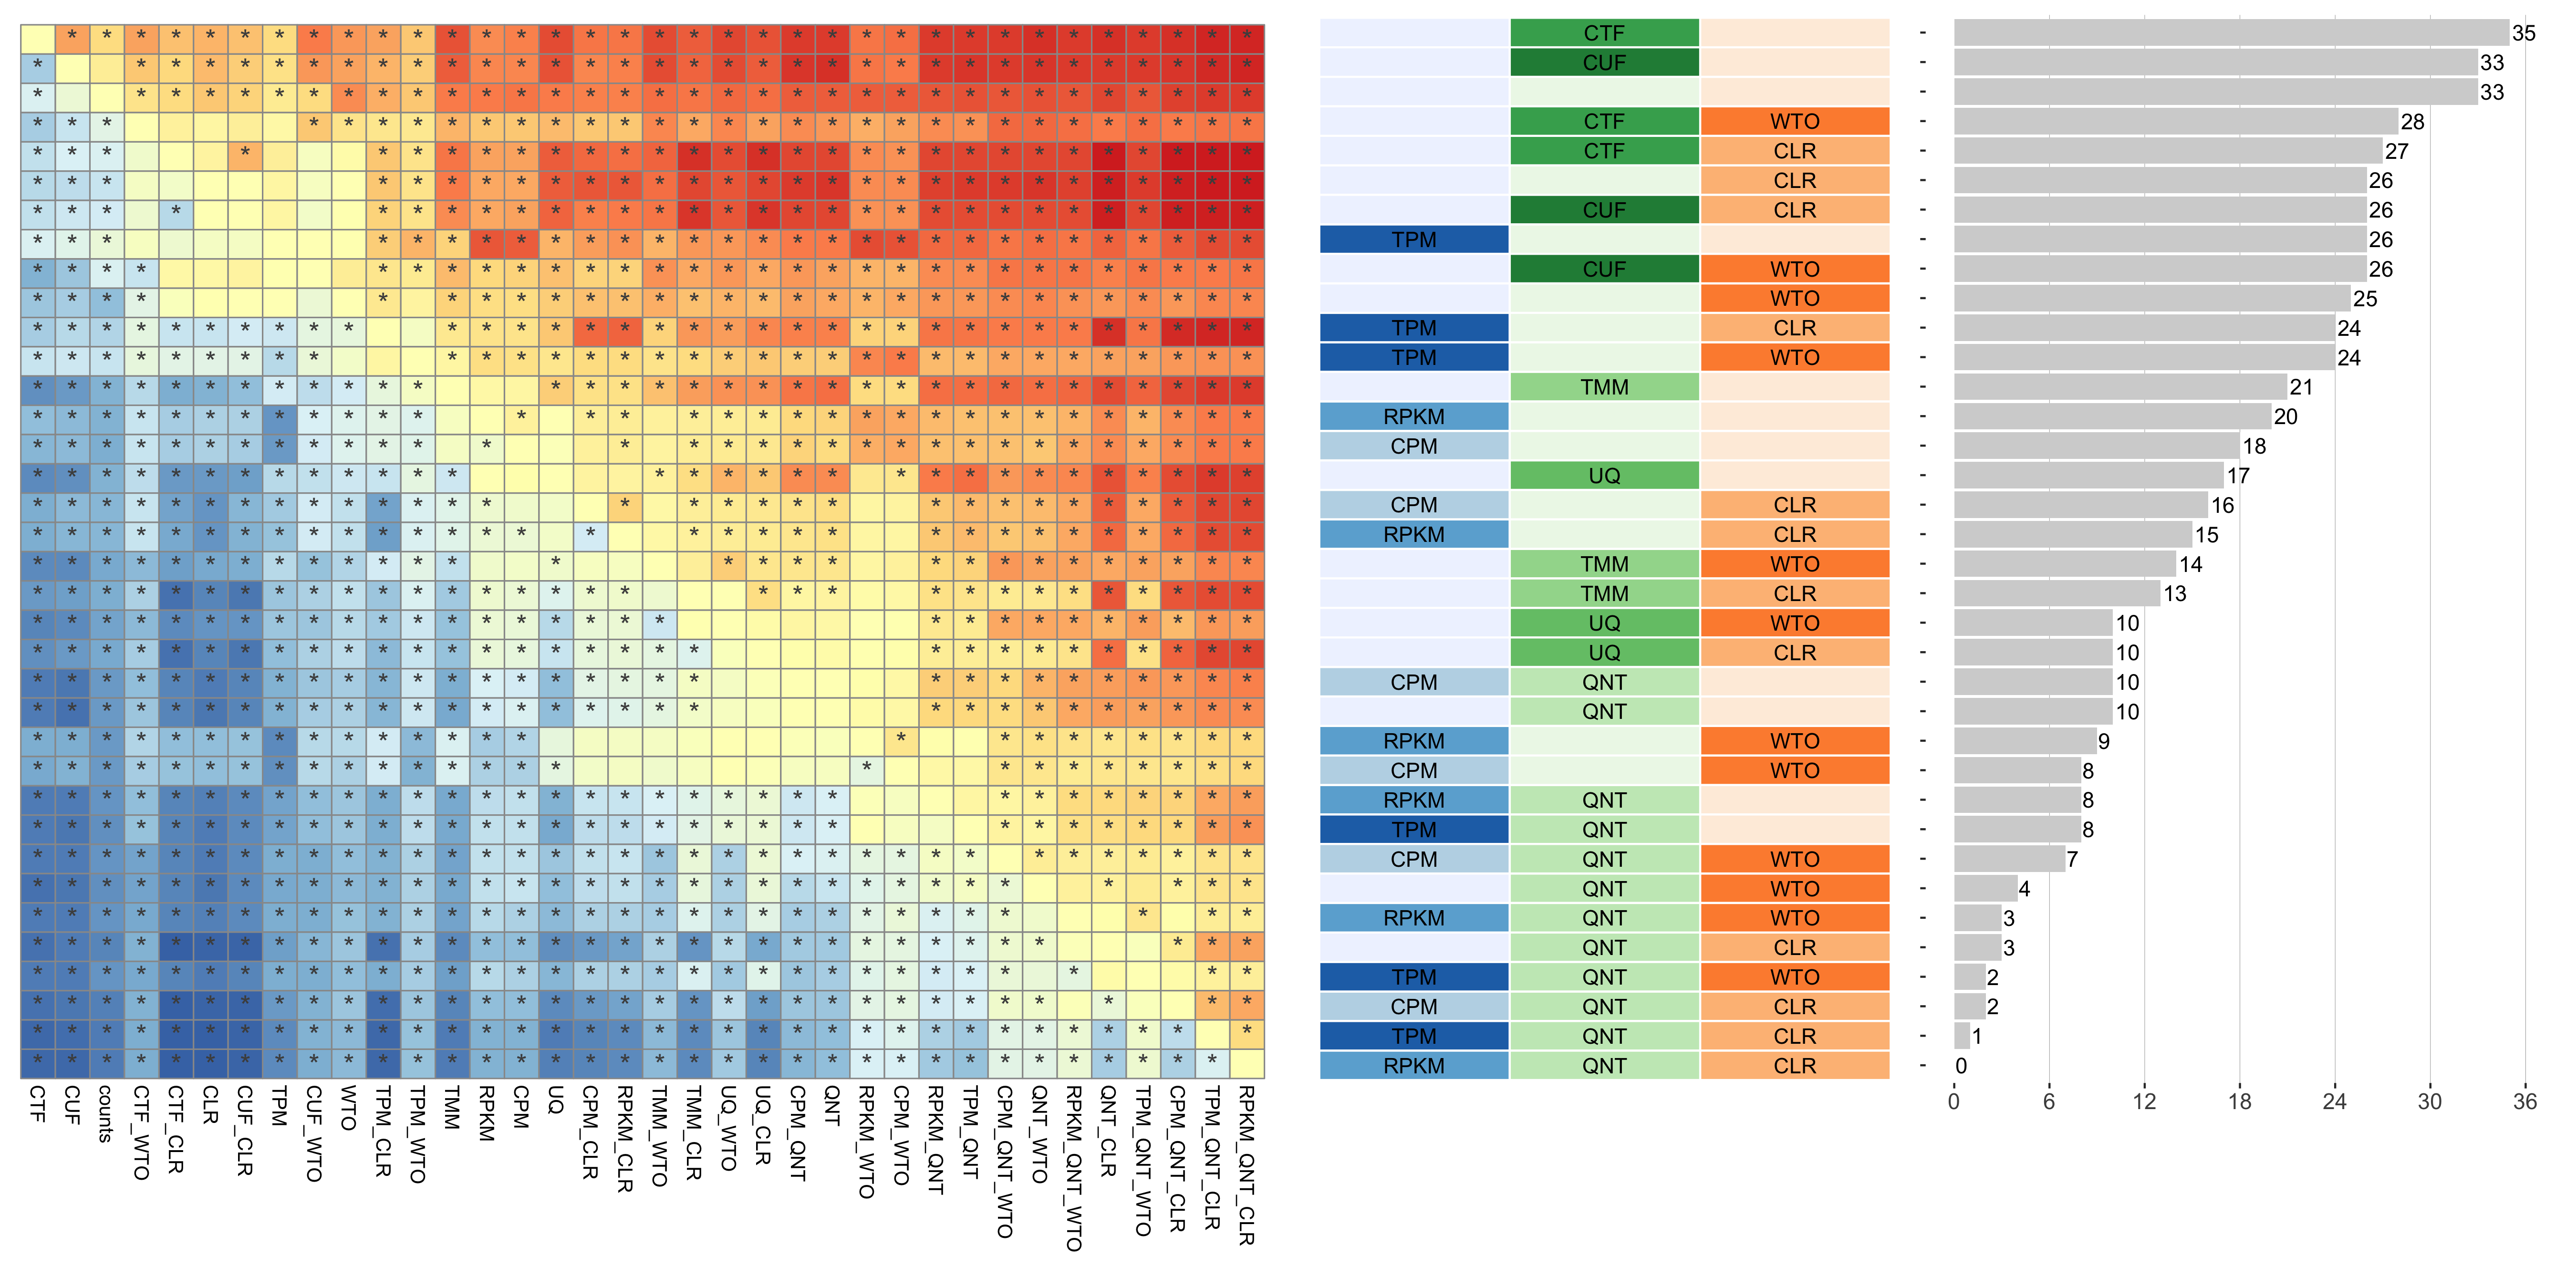 **Dataset-level pairwise comparison of workflow performance.** (**left**) The heatmap shows the relative performance of a pair of workflows, corresponding to a row and a column, directly compared to each other for the resampled GTEx datasets of a given sample size based on the tissue-naive gold standard. The color in each cell (row, column) represents the proportion of datasets for which the workflow along the row has a higher log2(auPRC/prior) than the workflow along the column. Comparisons that are statistically significant (corrected p < 0.01) based on a paired Wilcoxon test are marked with an asterisk. (**middle**) The workflows (rows) are described in terms of the specific method used in the within-sample normalization (blues), between-sample normalization (greens), and network transformation (oranges) stages. (**right**) The barplot shows the number of times each workflow was significantly greater than another workflow.